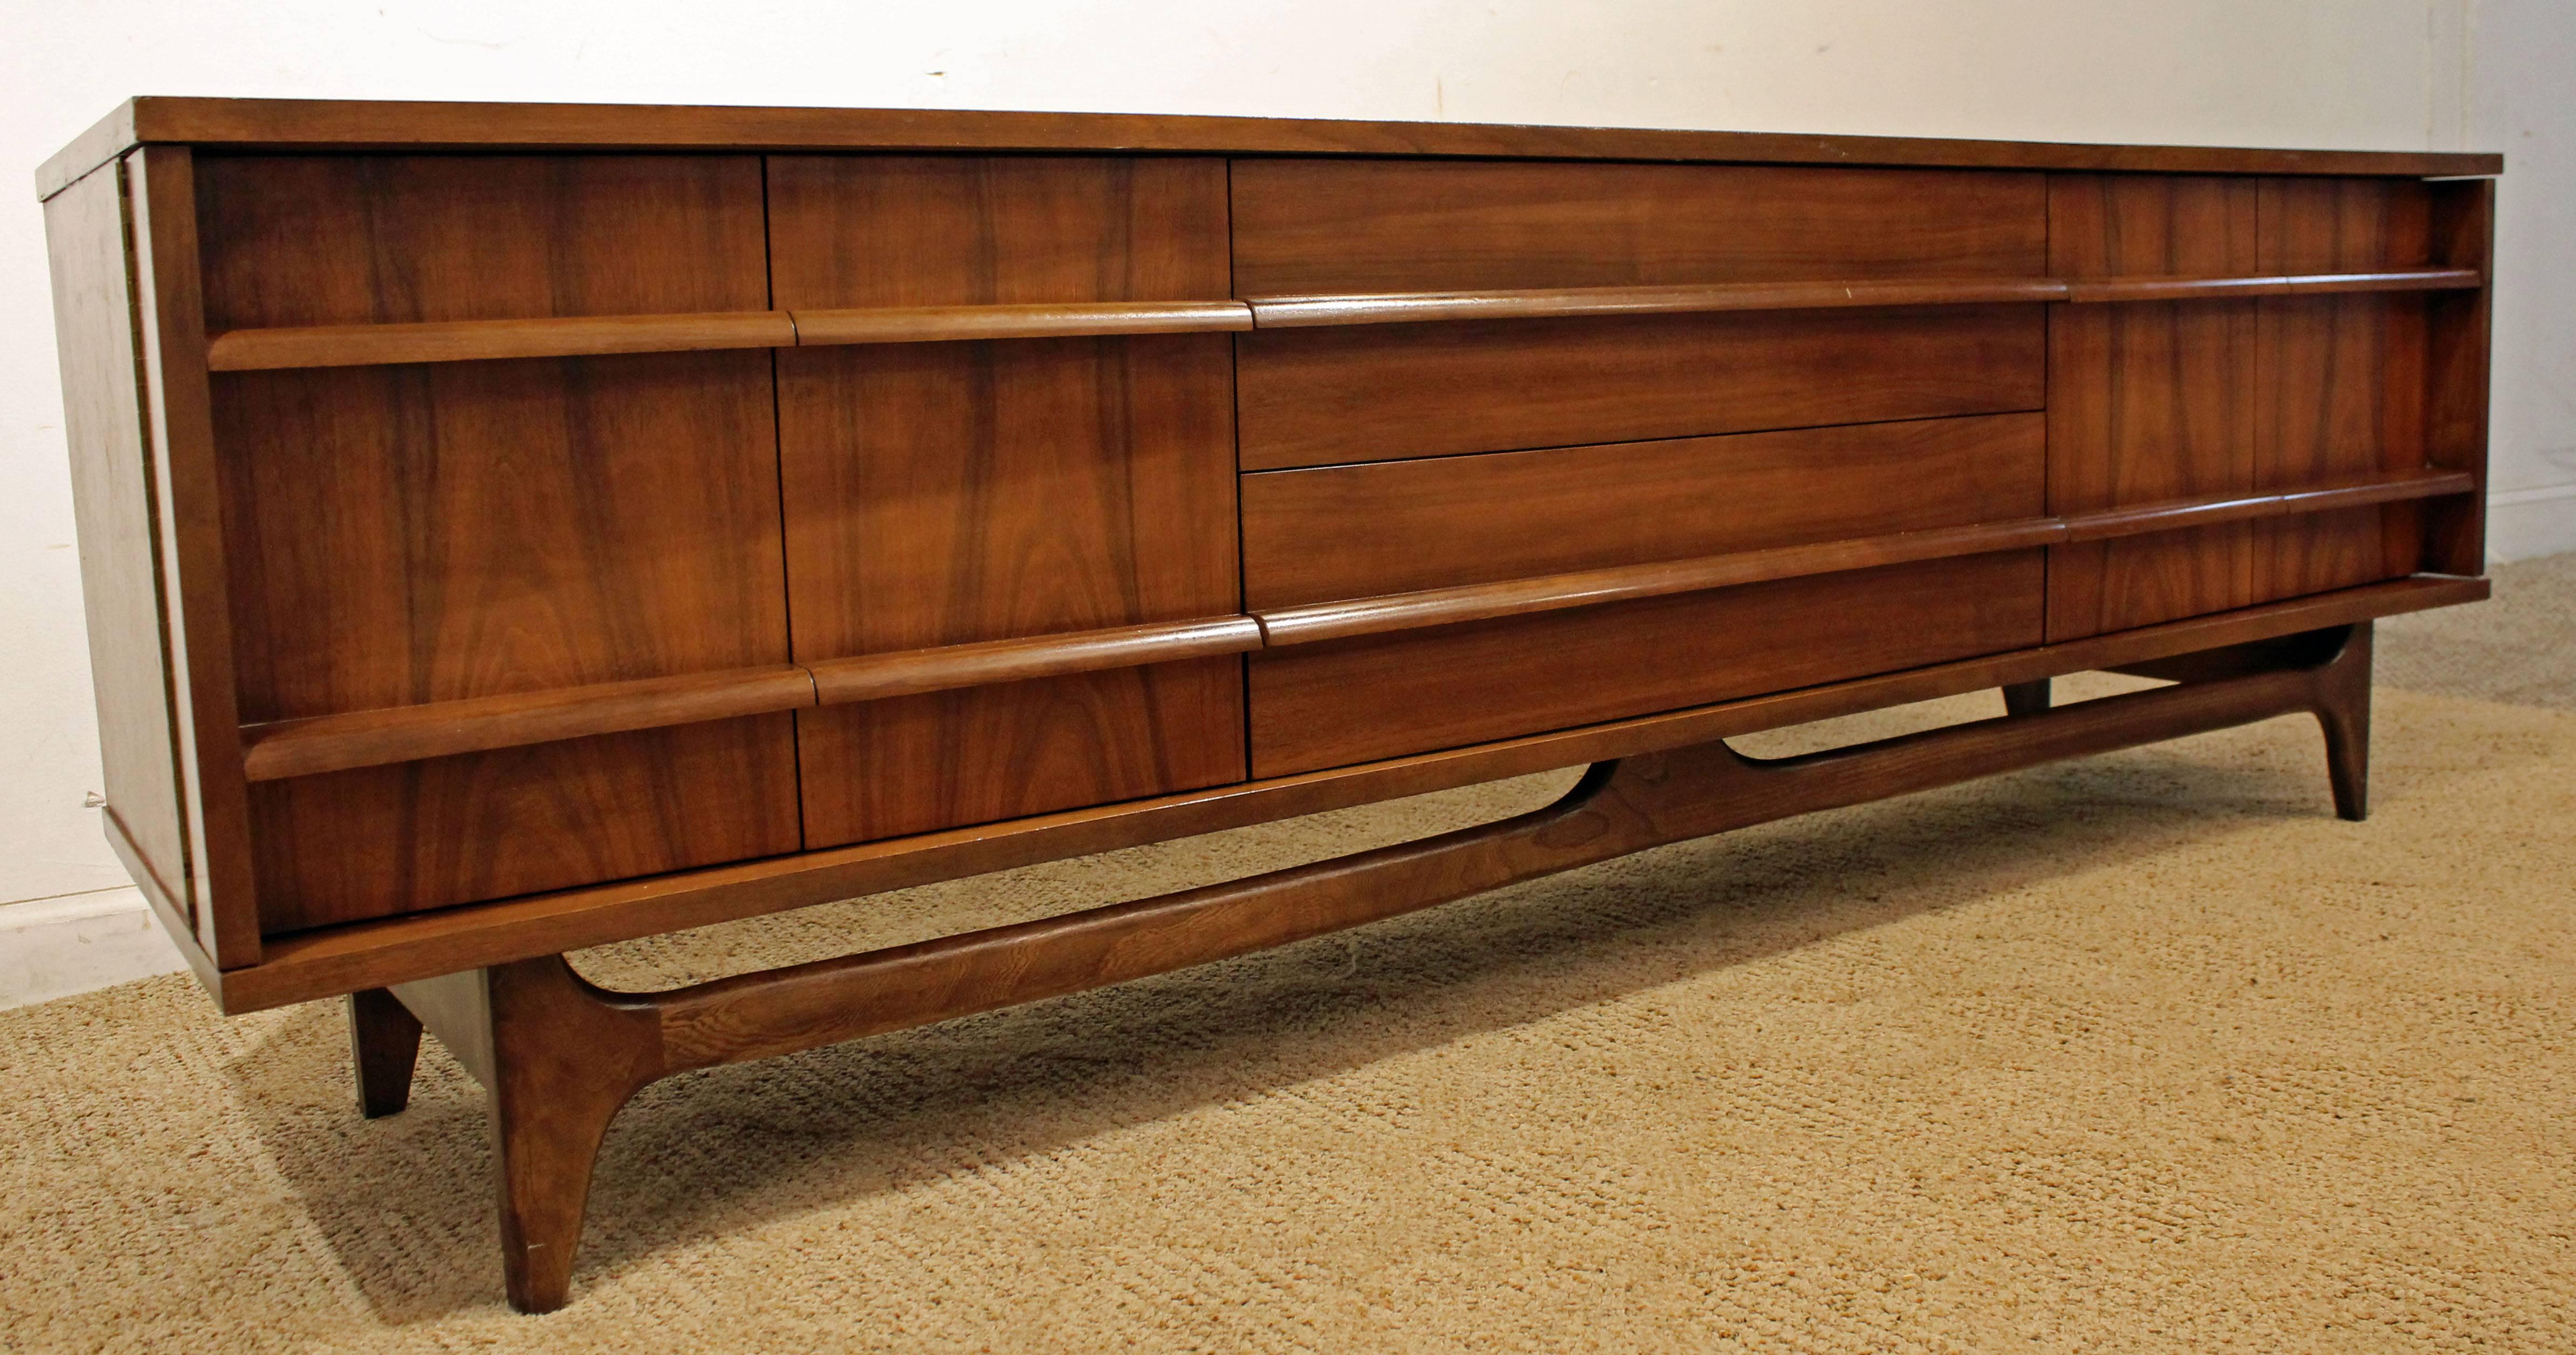 Offered is a beautiful Mid-Century Modern credenza. This piece is made of walnut, featuring a concave front, two doors on both sides and three centre drawers with sculpted pulls. The top has been refinished, shows some age wear. It is signed by